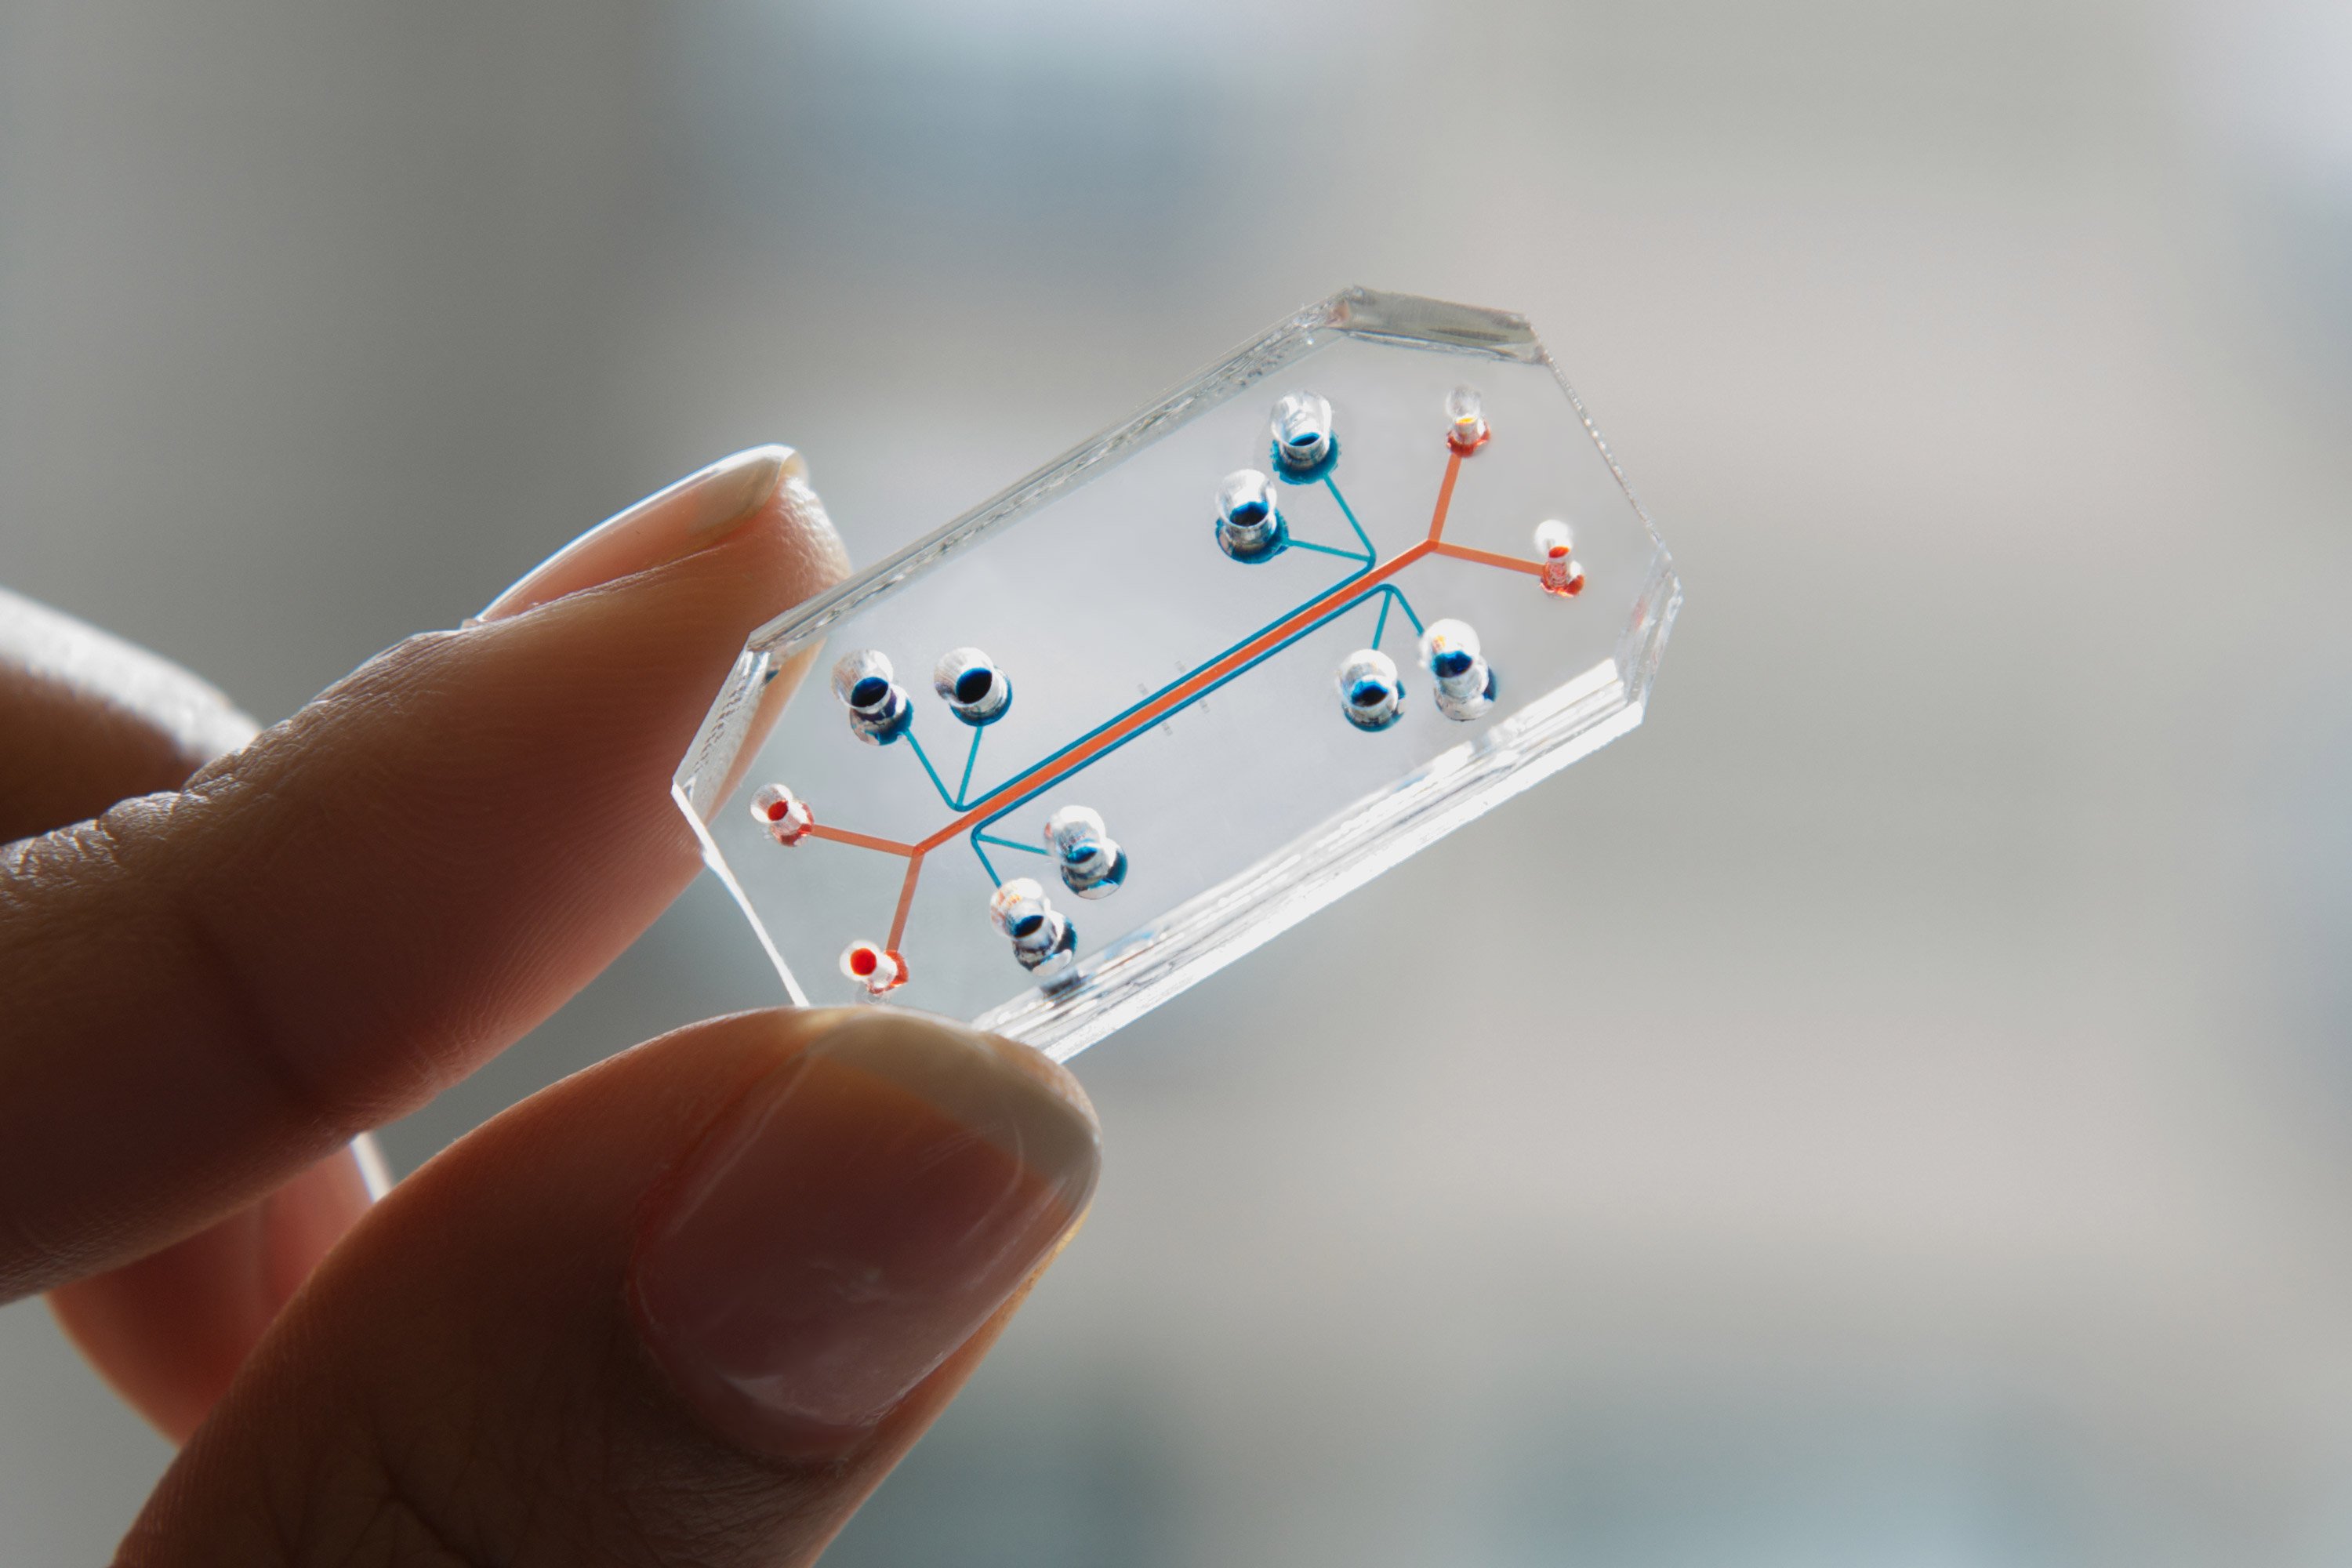 Emulates lung-on-a-chip